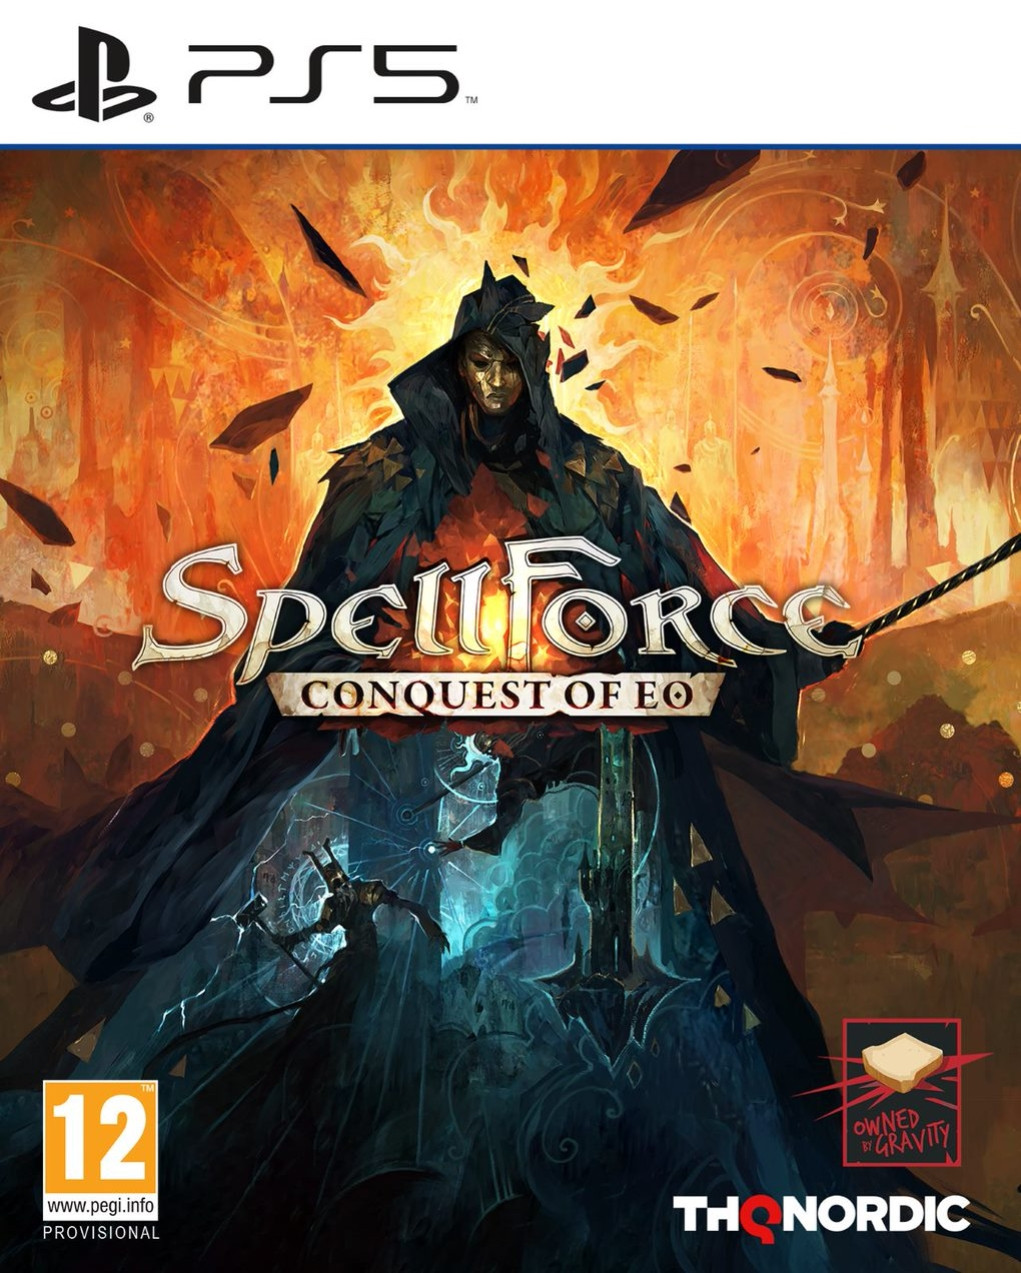 Spellforce: Conquest of Eo (PS5), Owned by Gravity, THQ Nordic